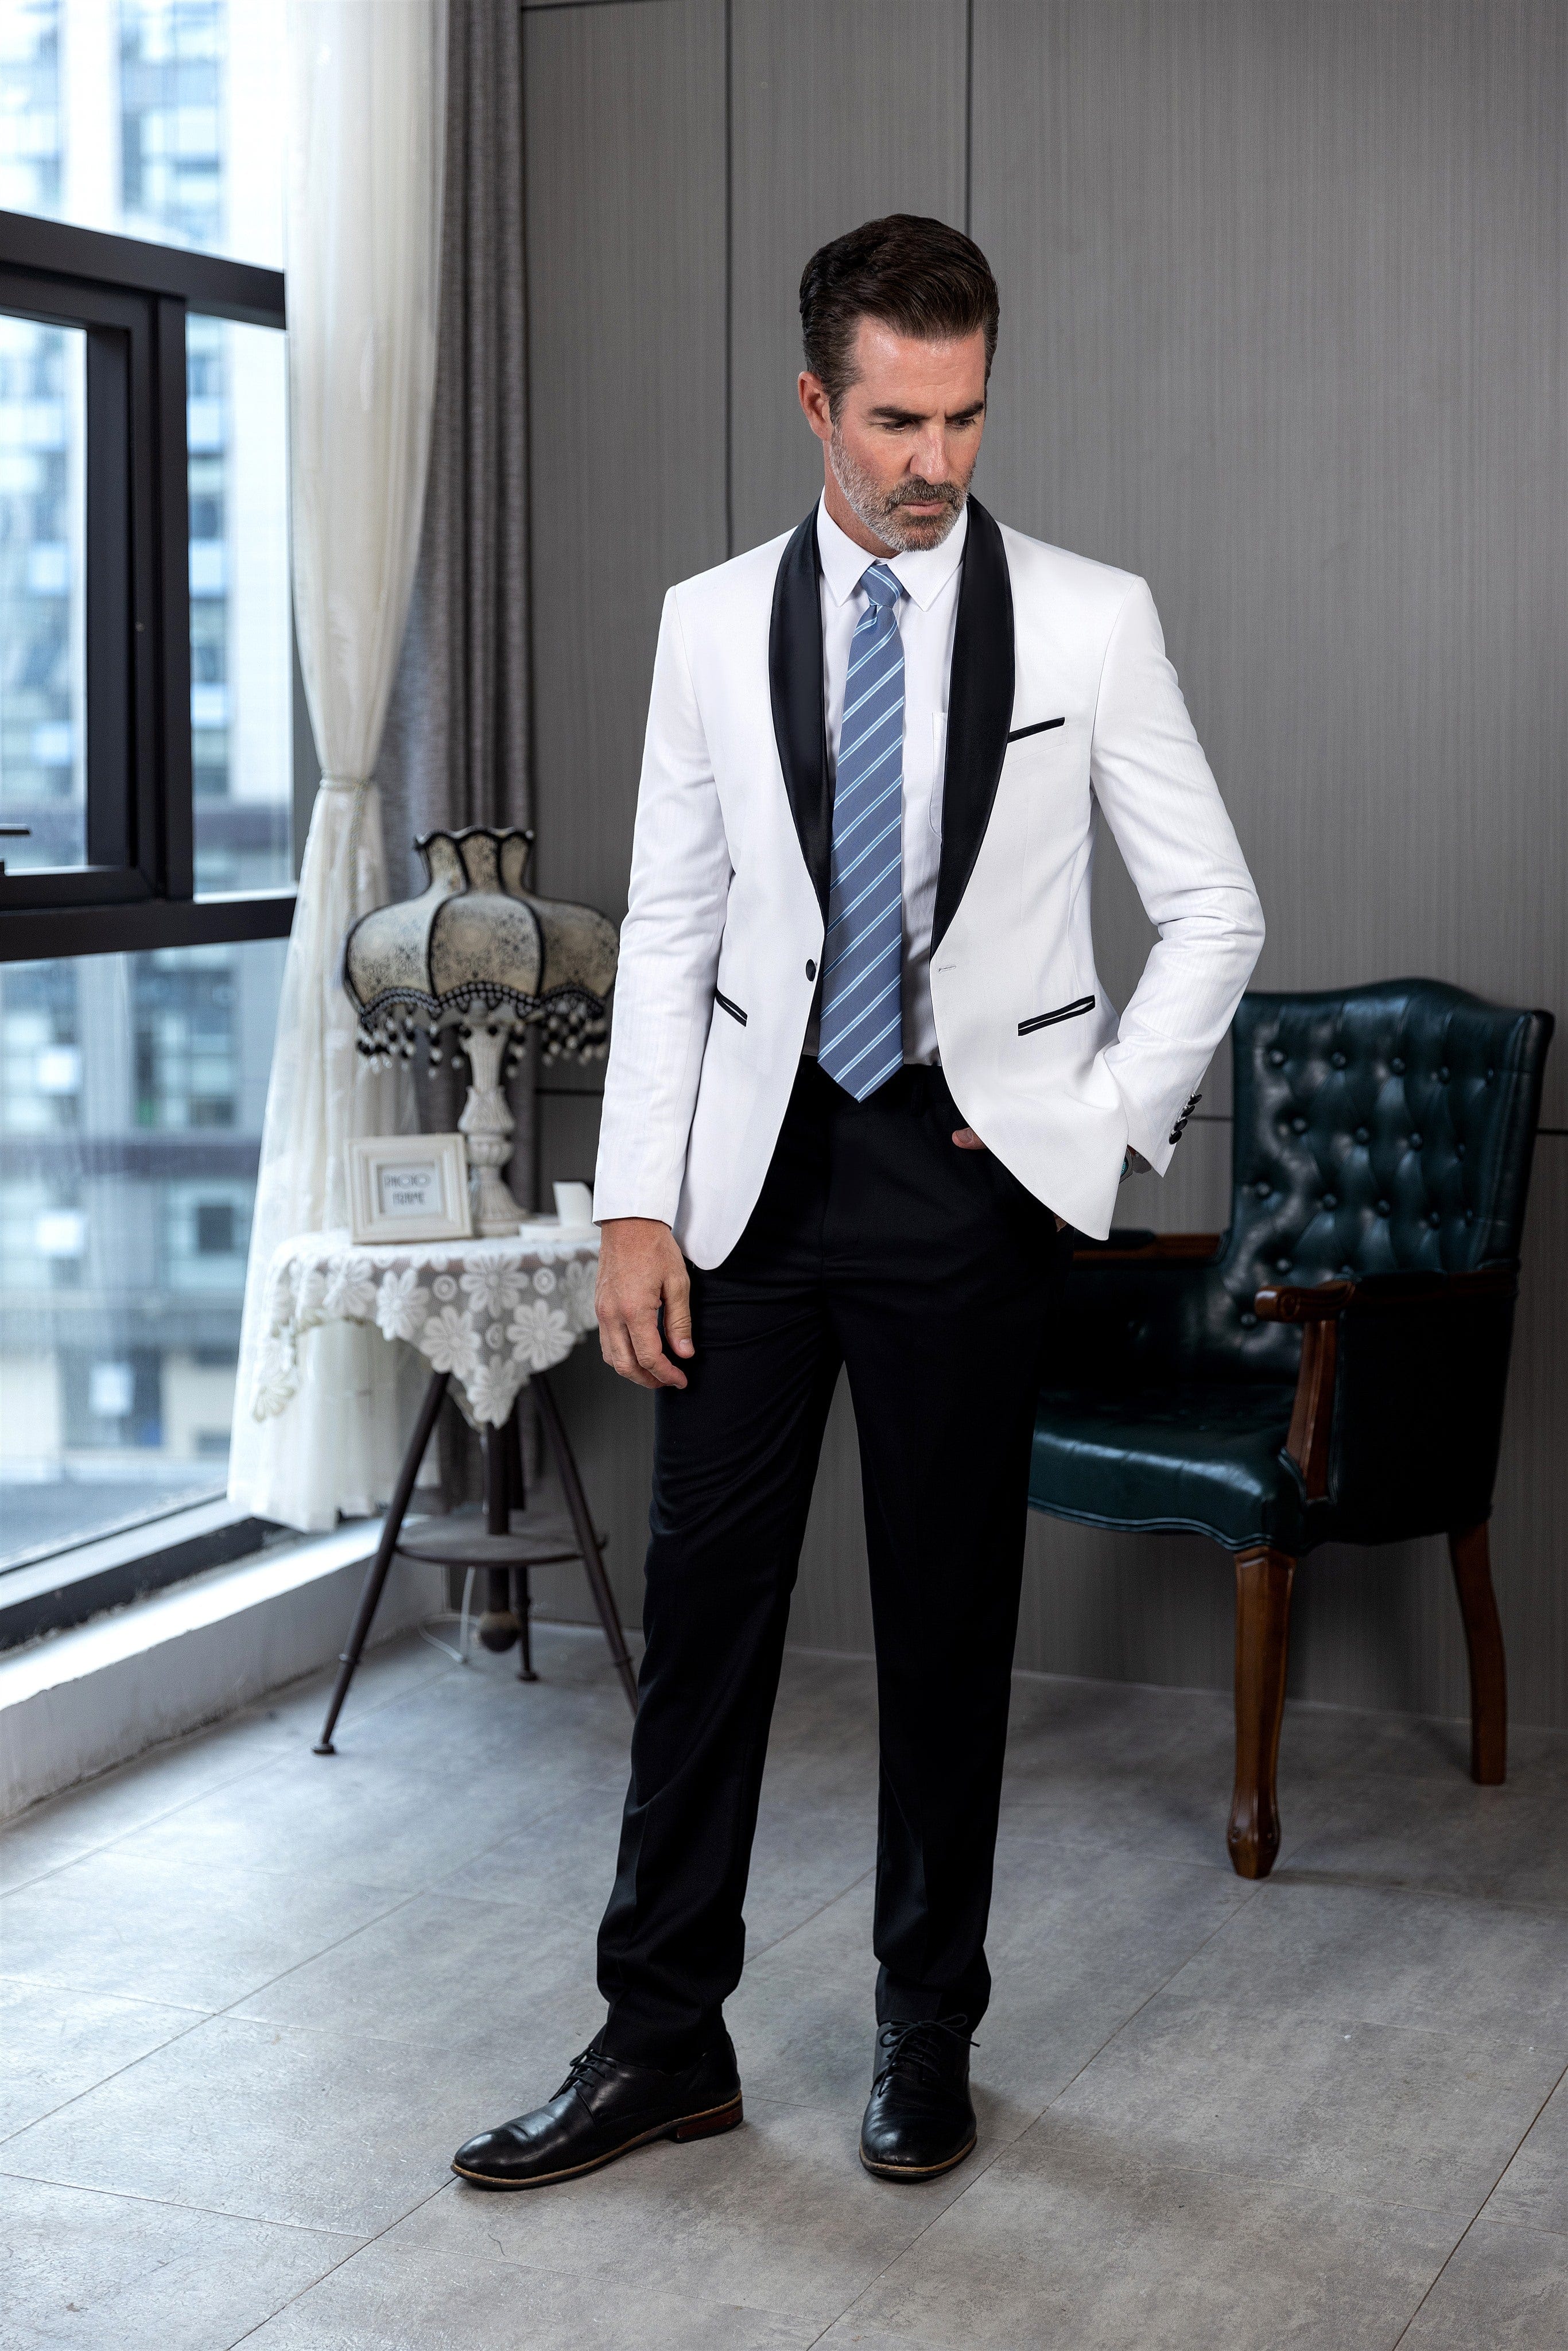 Off-White Havana Suit in Pure Silk | SUITSUPPLY India